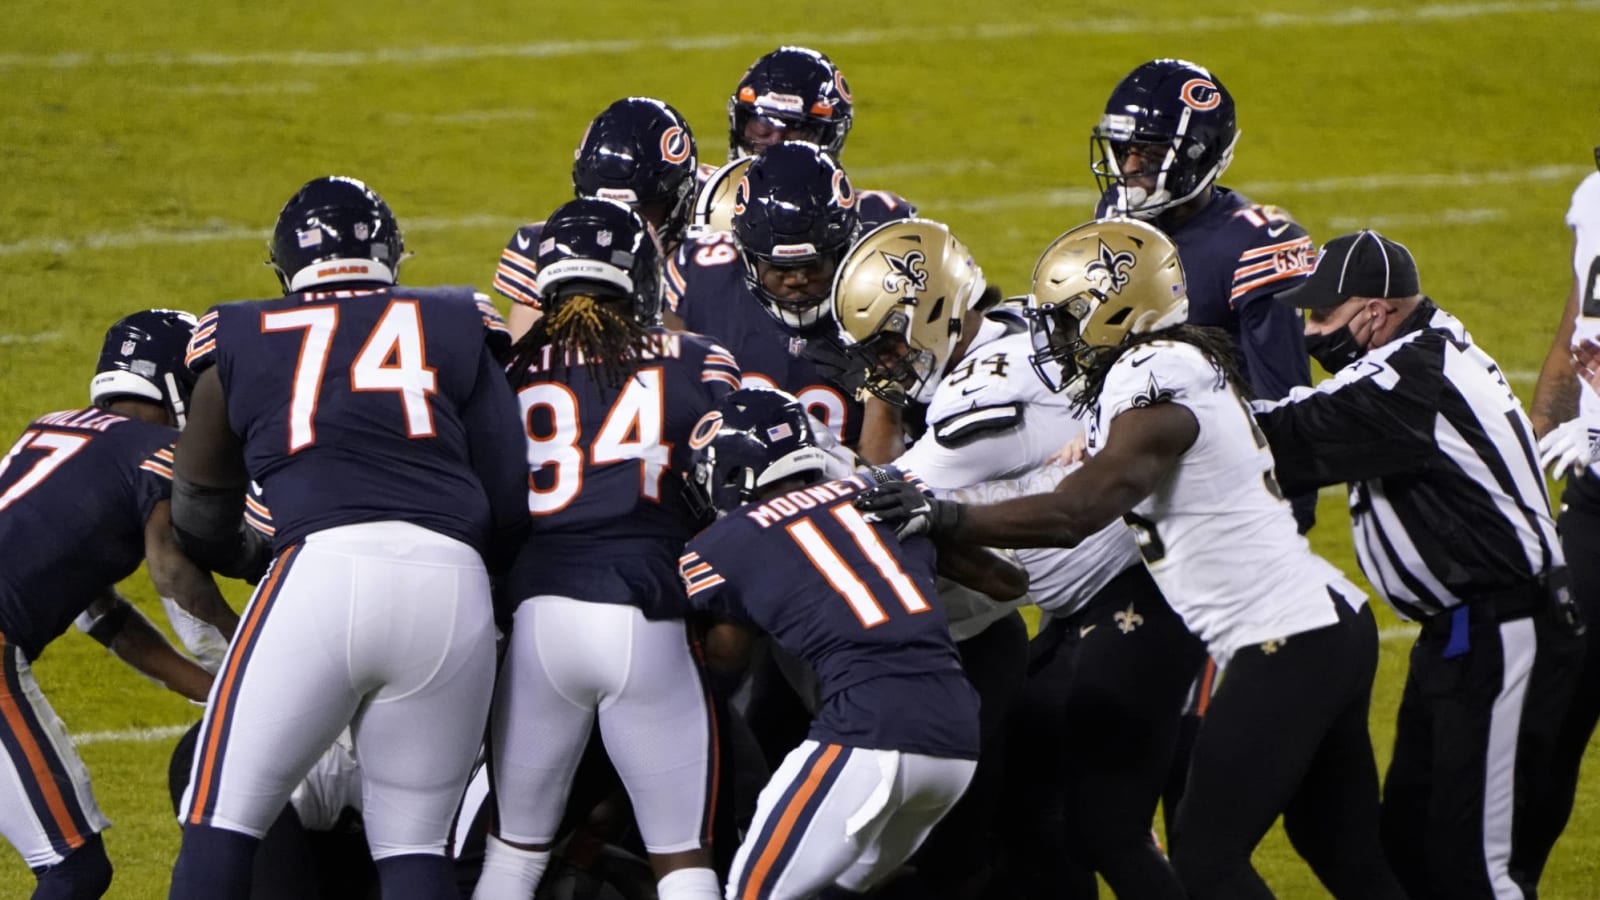 Watch: Huge fight breaks out after Bears’ Javon Wims throws punches